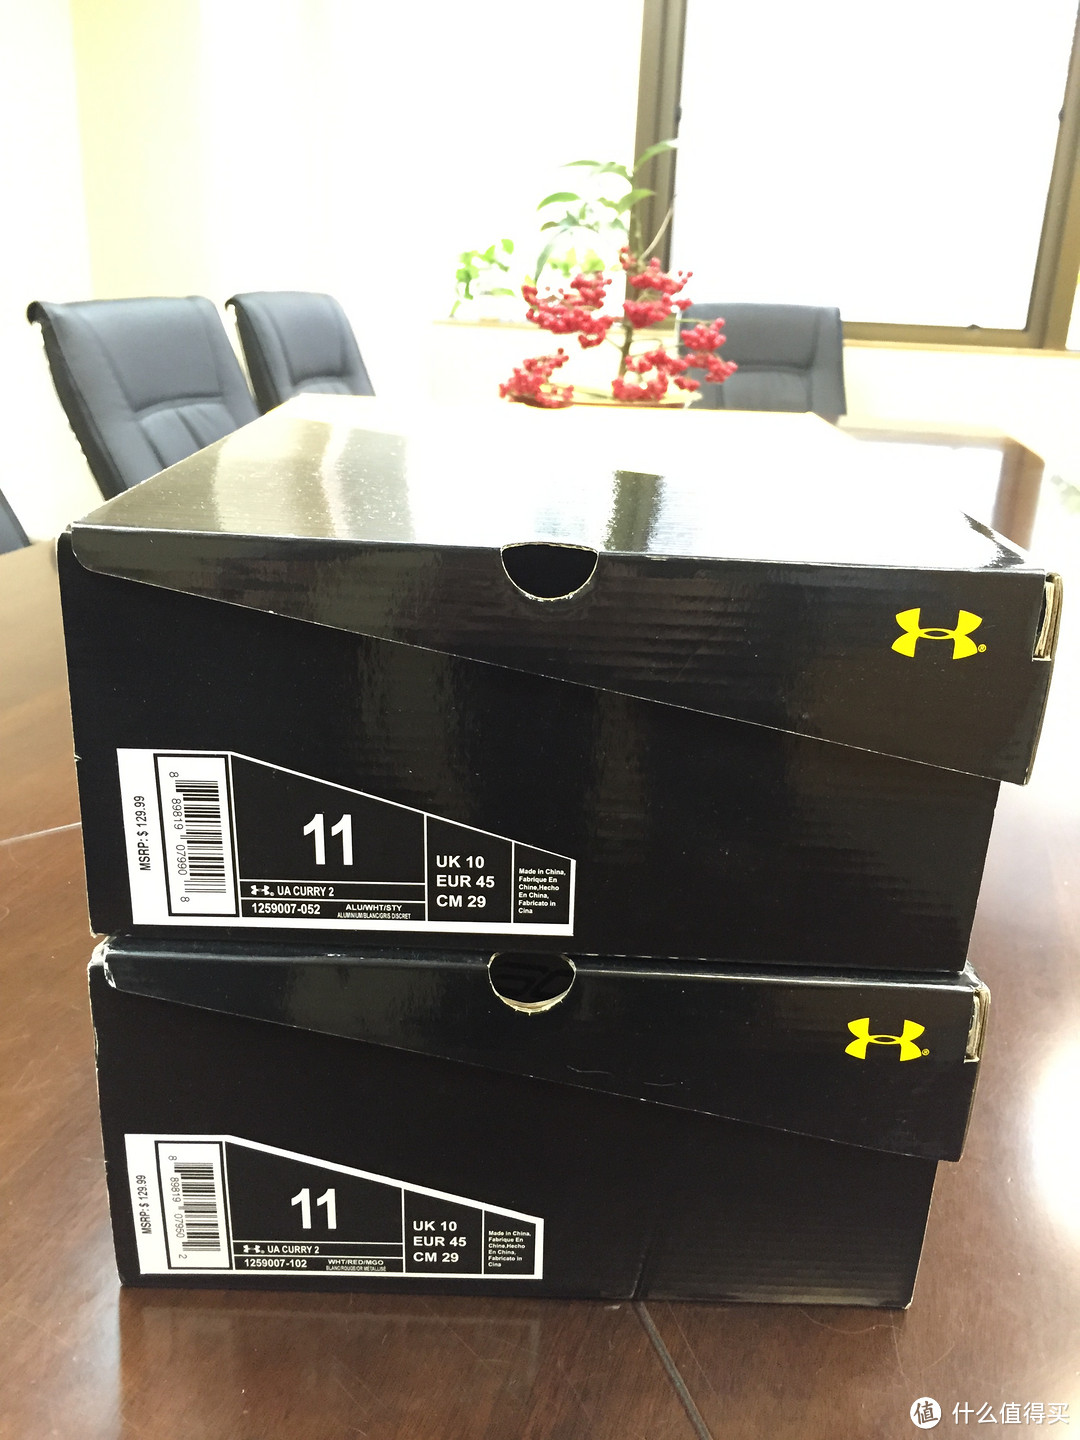 UNDER ARMOUR 安德玛 CURRY 2 ASG 篮球鞋 & STORM